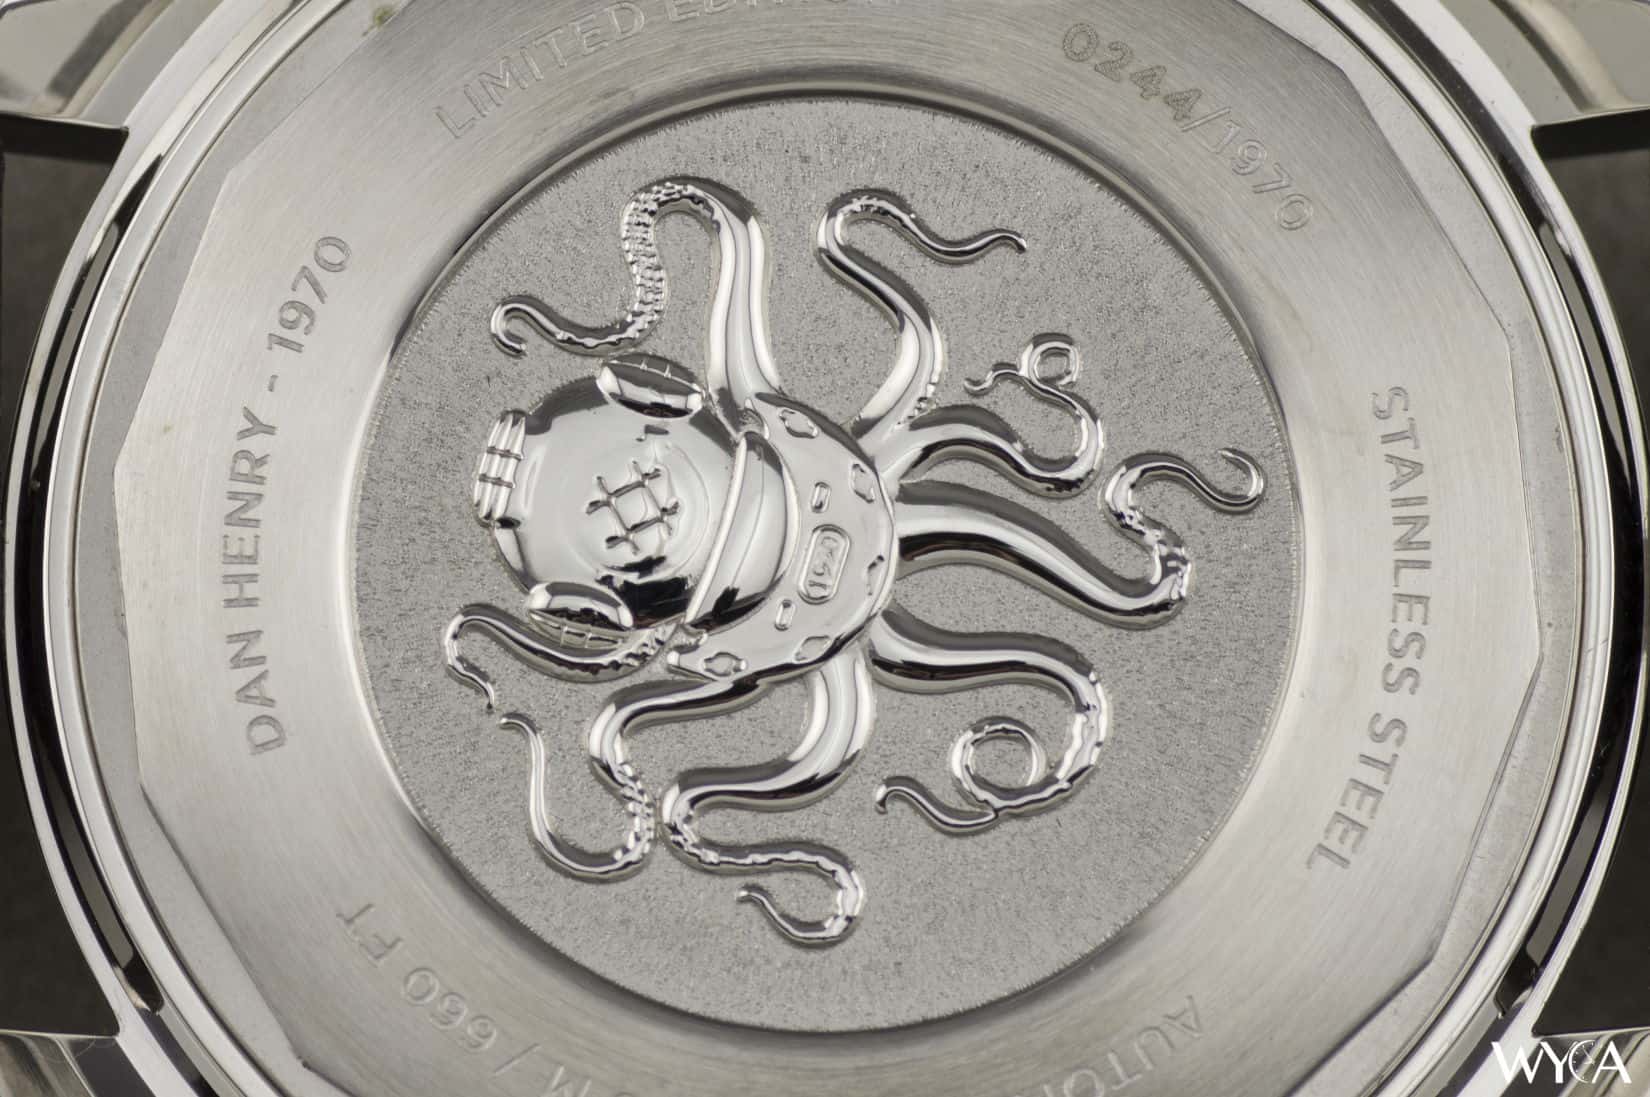 Close-up of the engraving on the Dan Henry 1970 caseback.